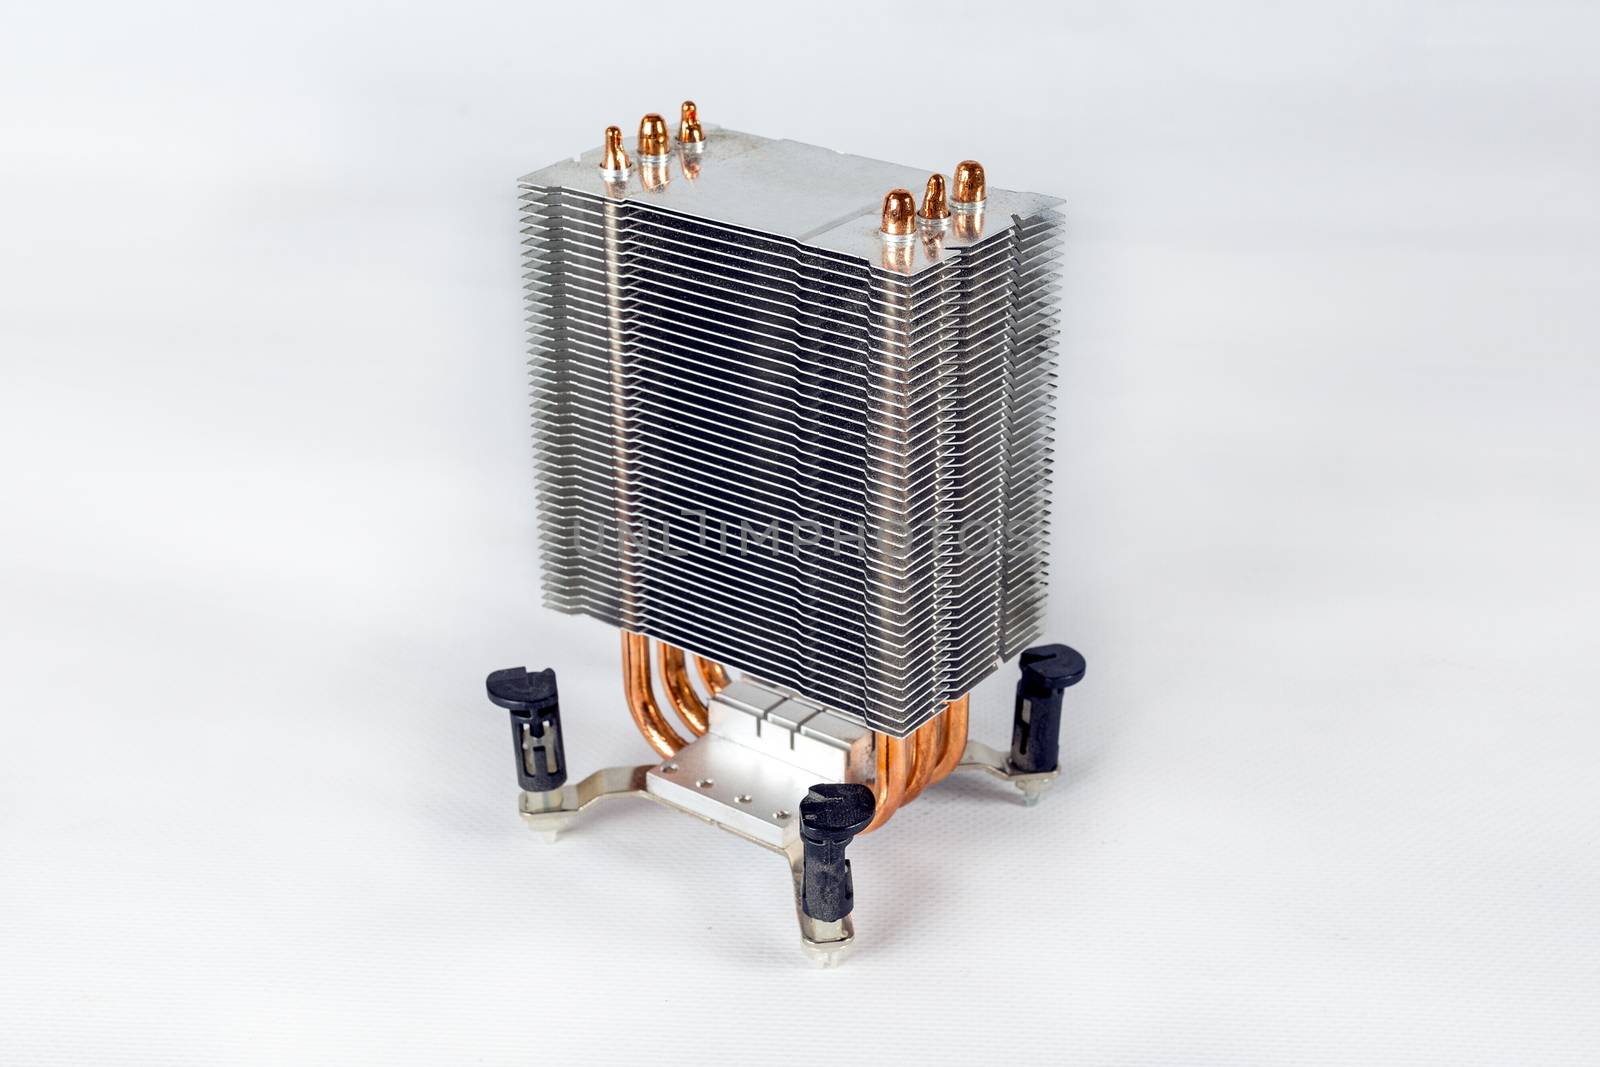 tower-type cpu cooler with copper heatpipes isolated on white background - side view